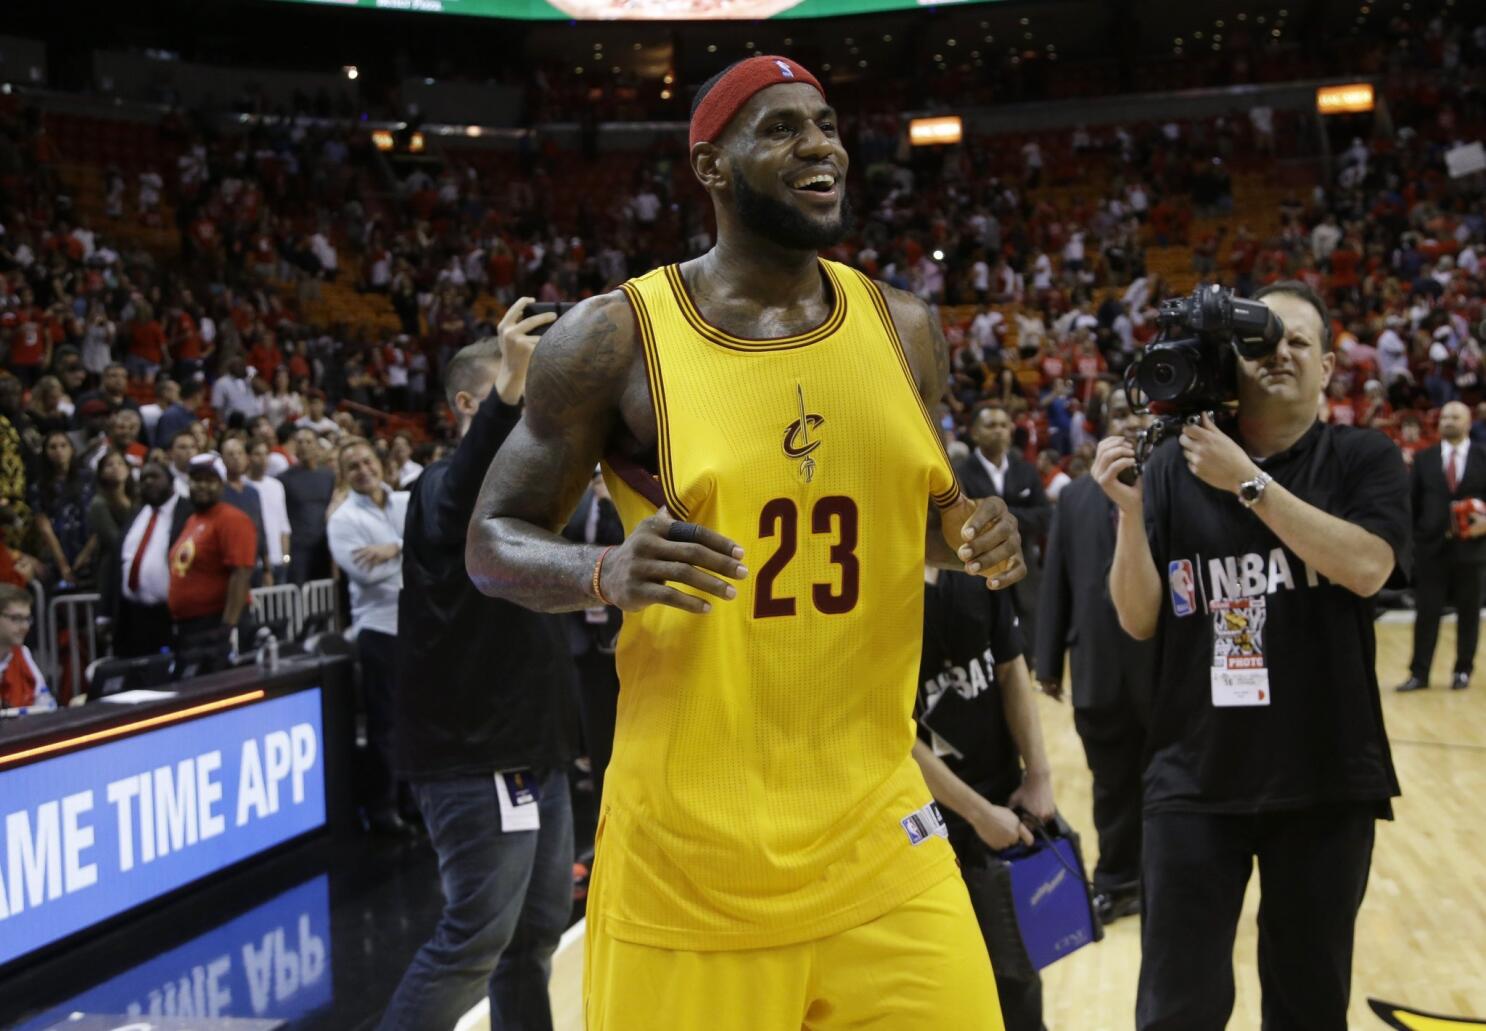 LeBron James' jersey most popular; Cavs No. 1 as well